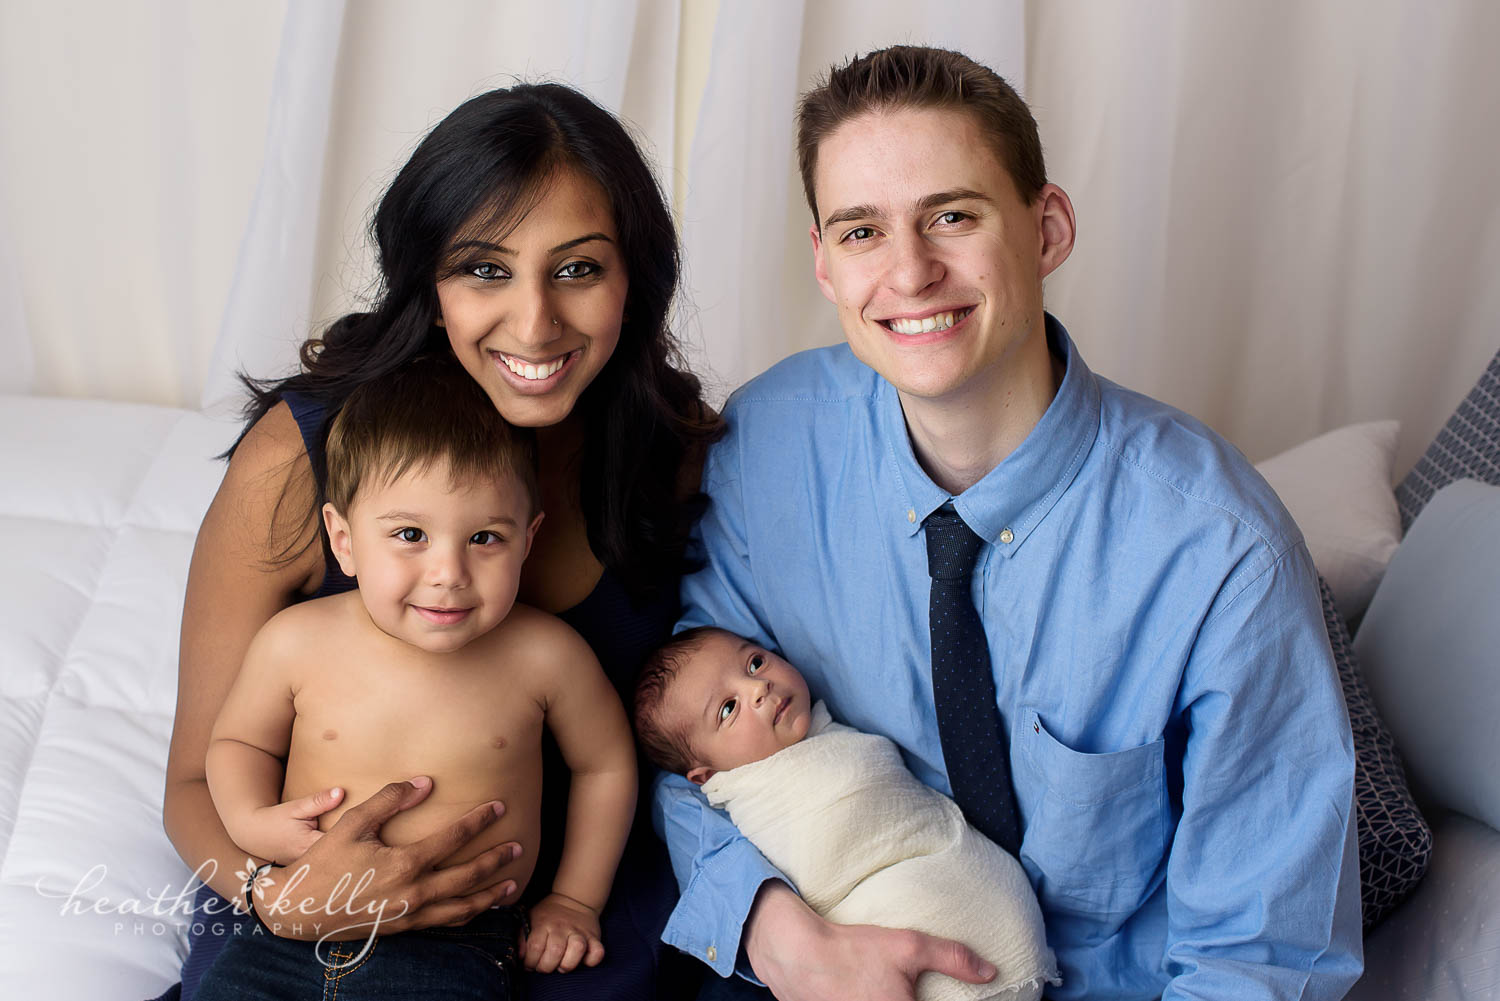 newborn family photography photo. Family of 4 on bed with toddler brother and newborn baby. 